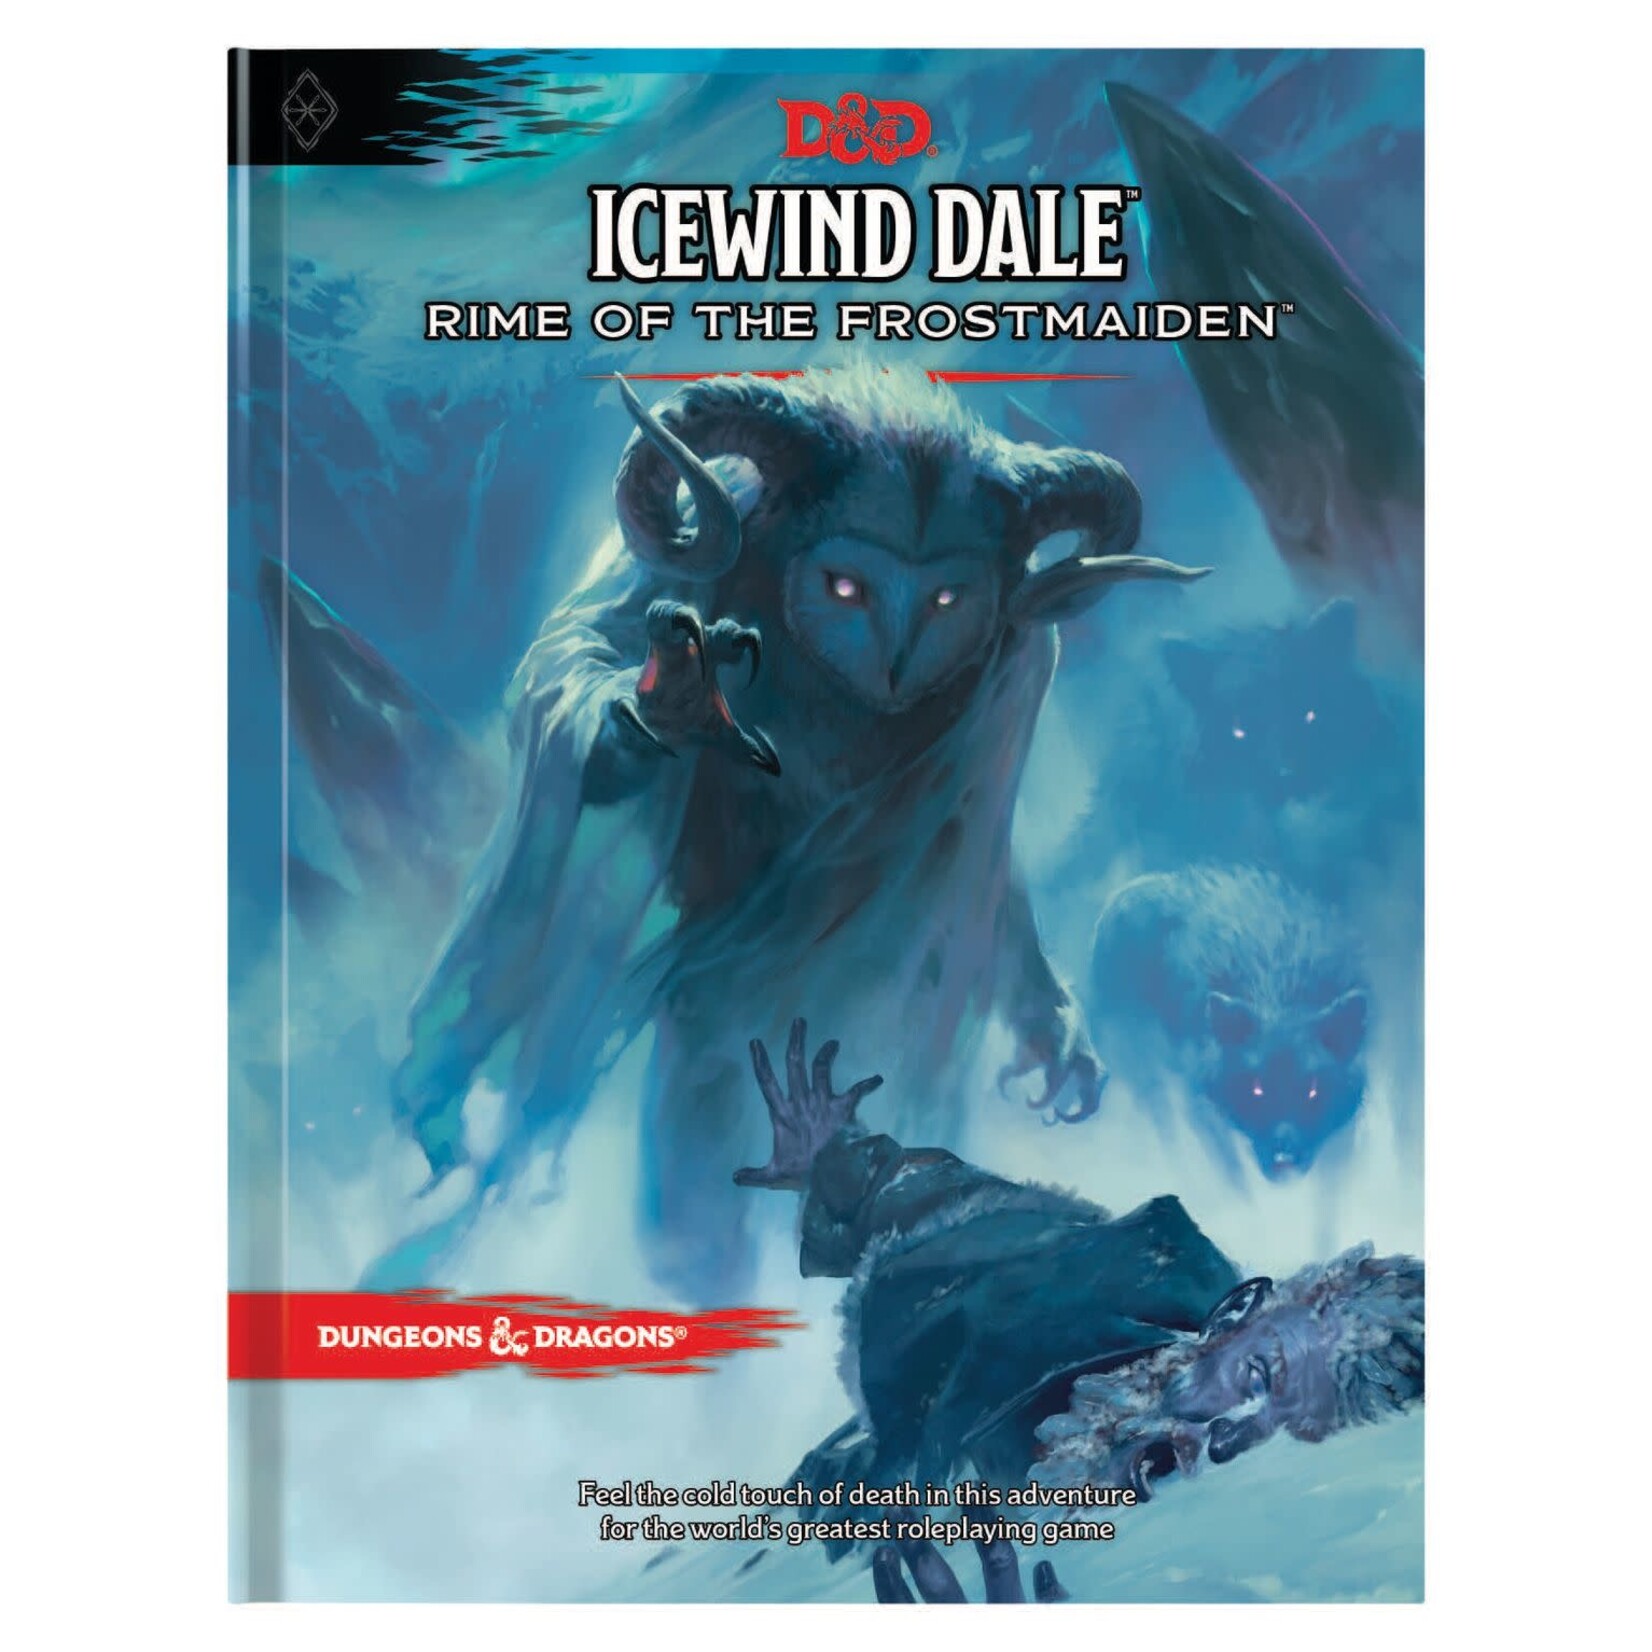 Wizards of the Coast Dungeons & Dragons Icewind Dale Rime of the Frostmaiden